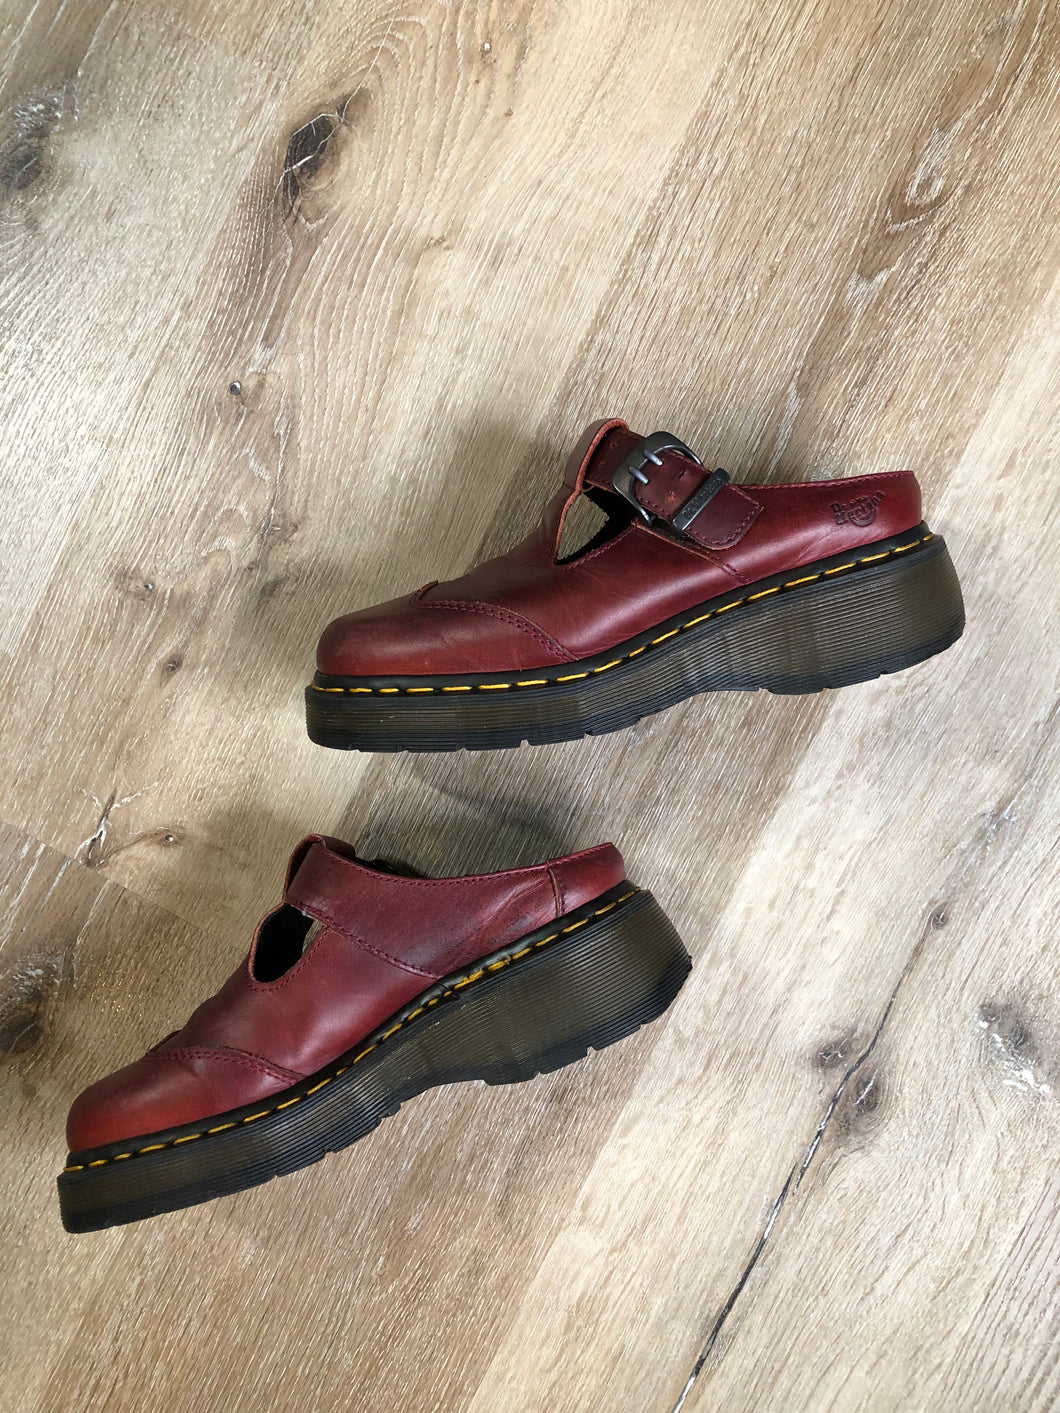 Vintage Doc Martens red smooth leather slip-on Mary Janes with Polley T-Bar strap and adjustable buckle, cap toe and air-cushioned sole. Made in England.

Size UK 6 or US 8 women’s 

*Shoes are in great condition with some minor wear in leather upper and soles.